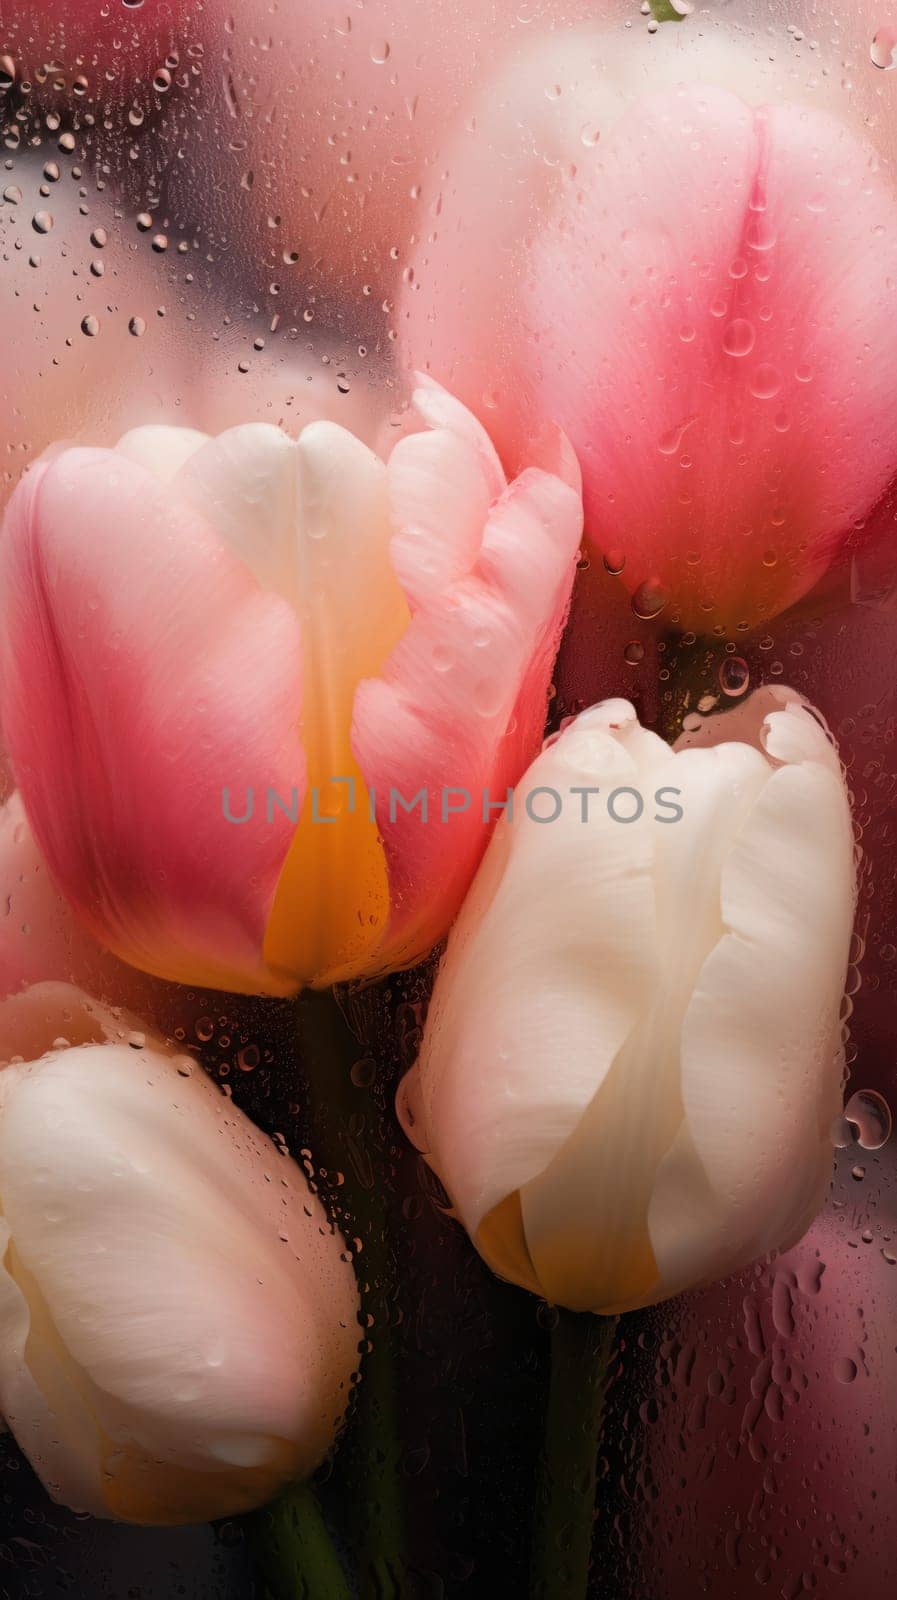 Background of blooming flowers in front of glass with water drops by nijieimu